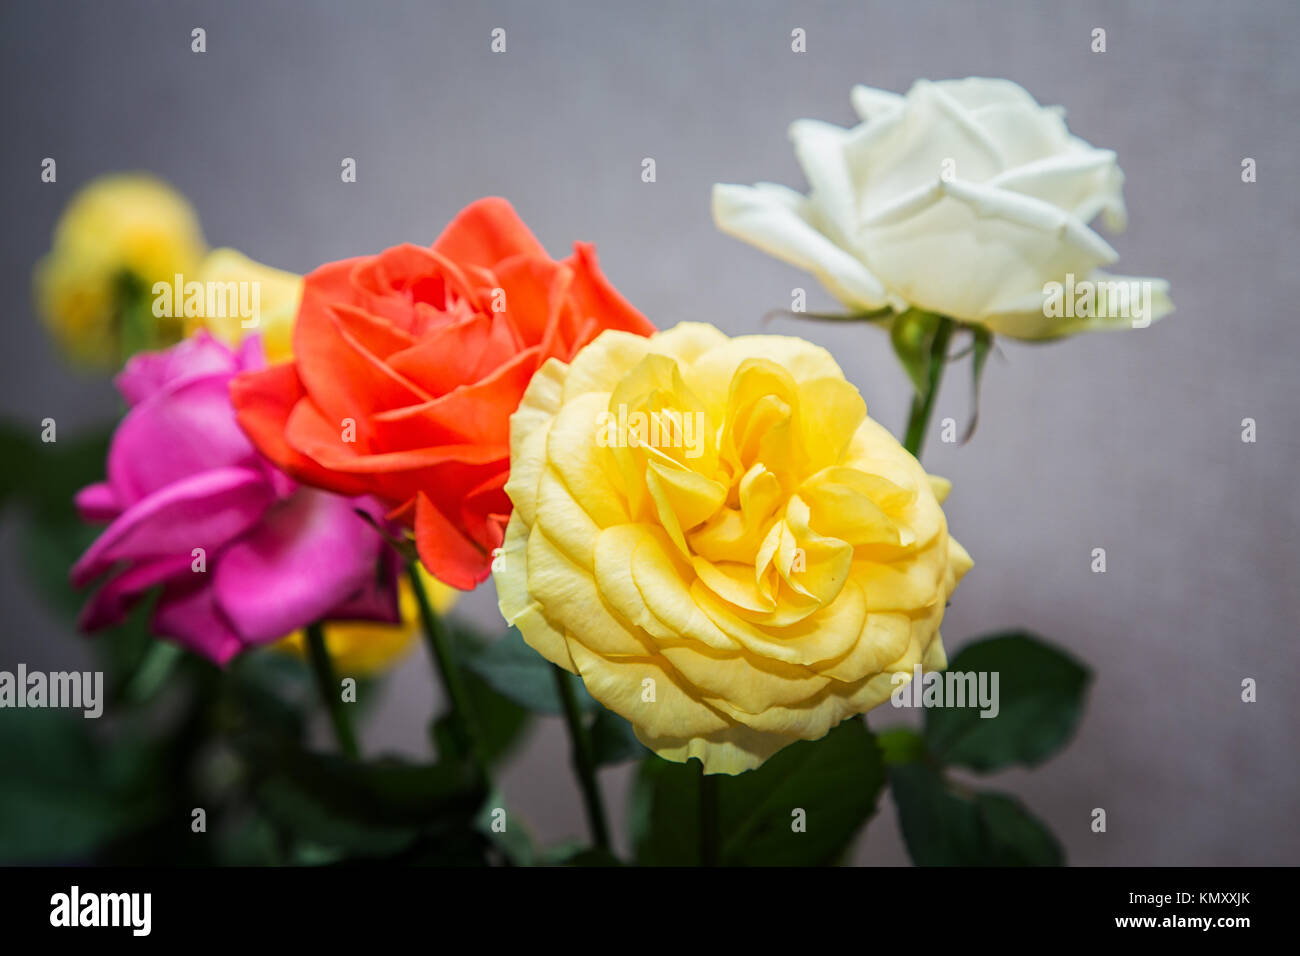 bouquet of colorful roses close-up on a gray background Stock Photo